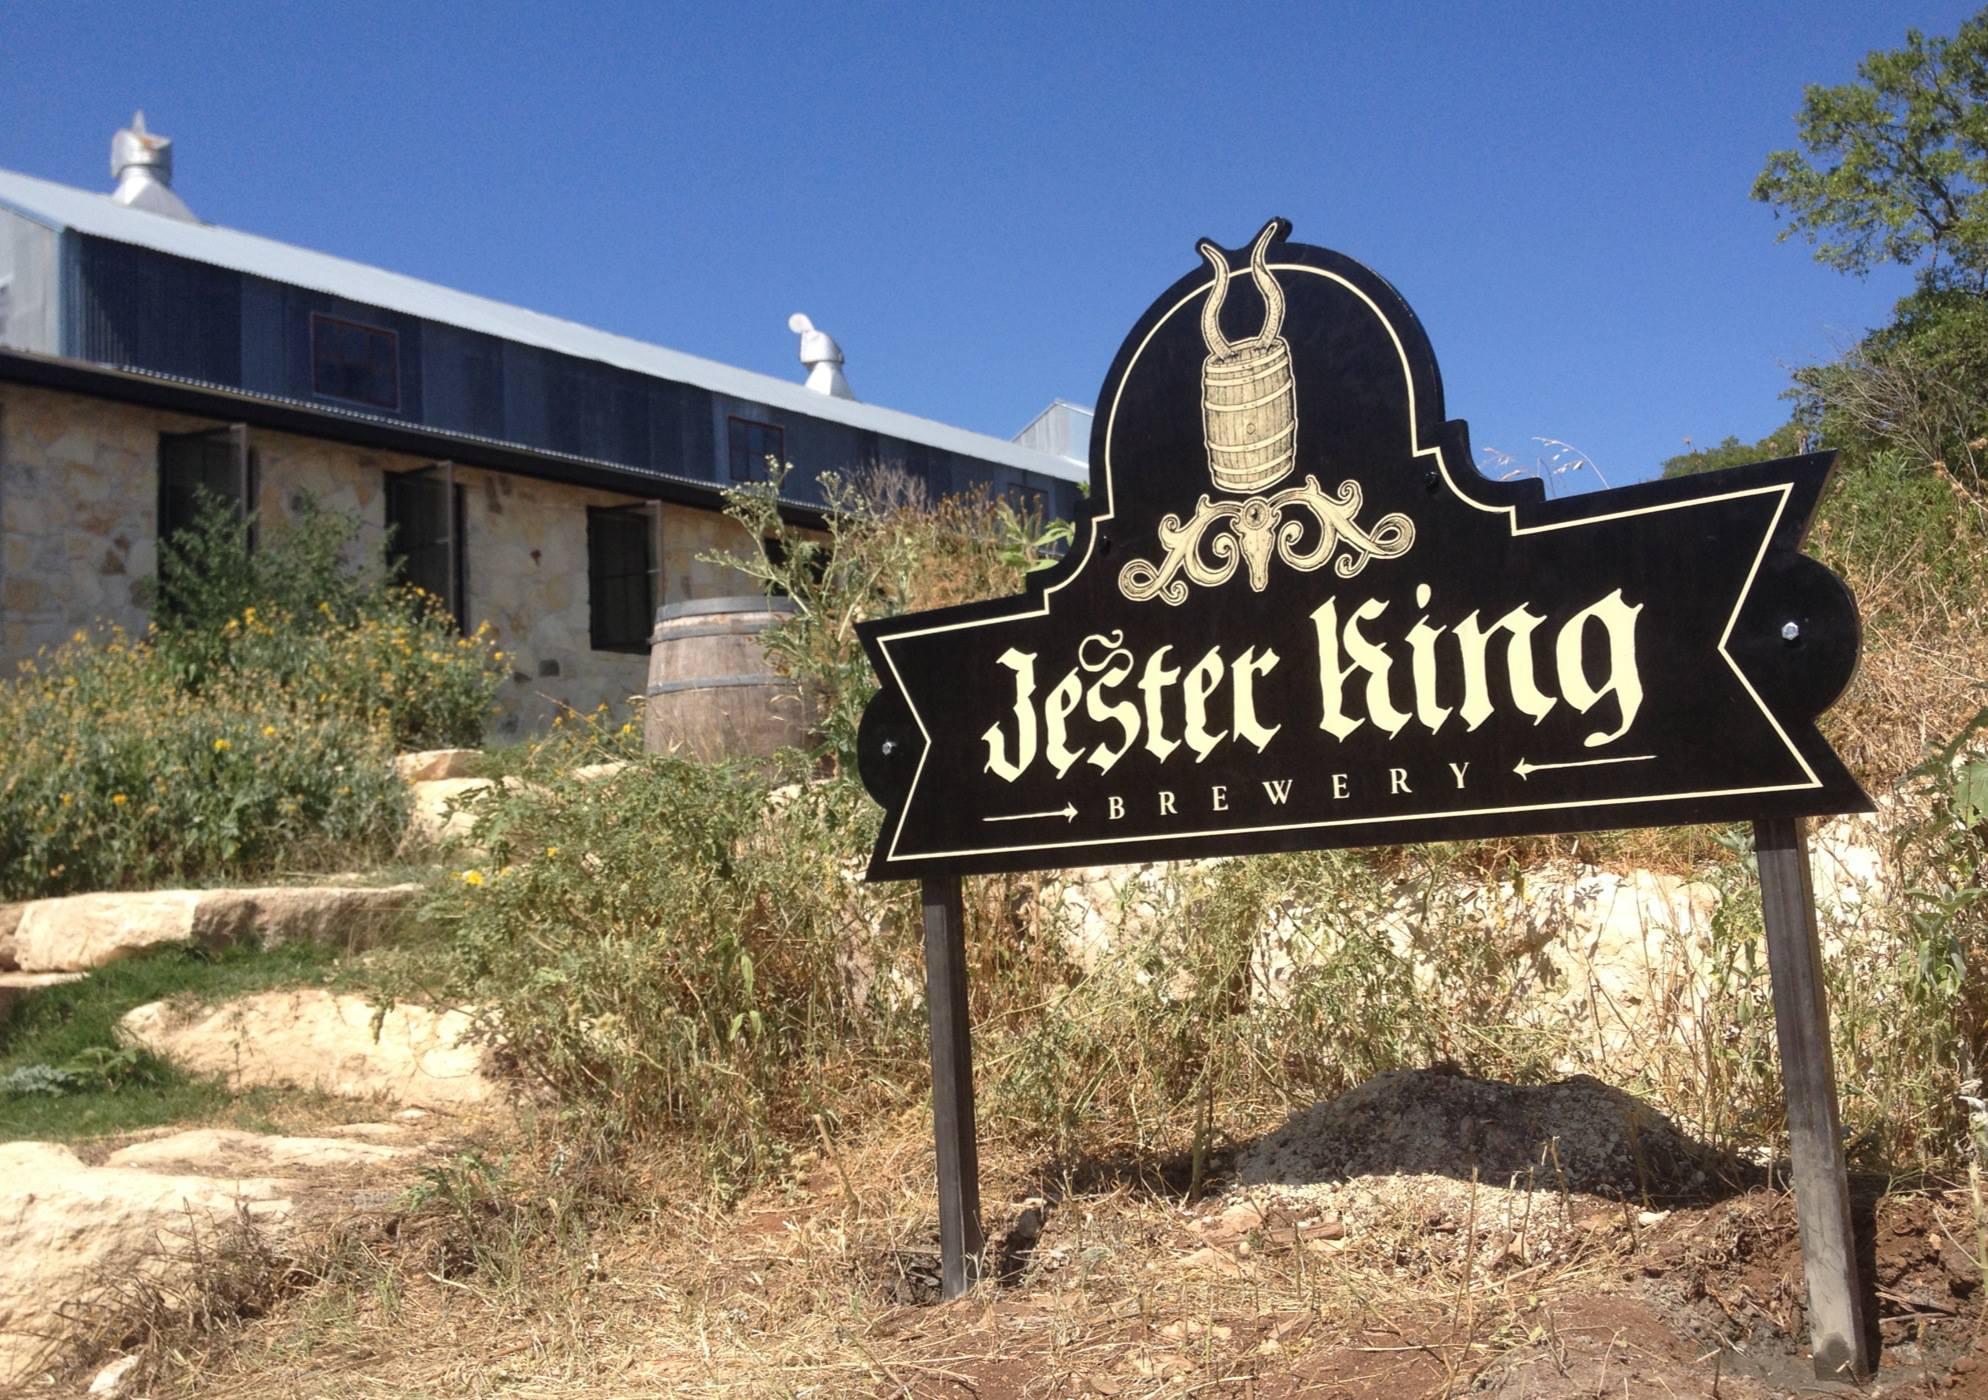 Jester King Brewery, 